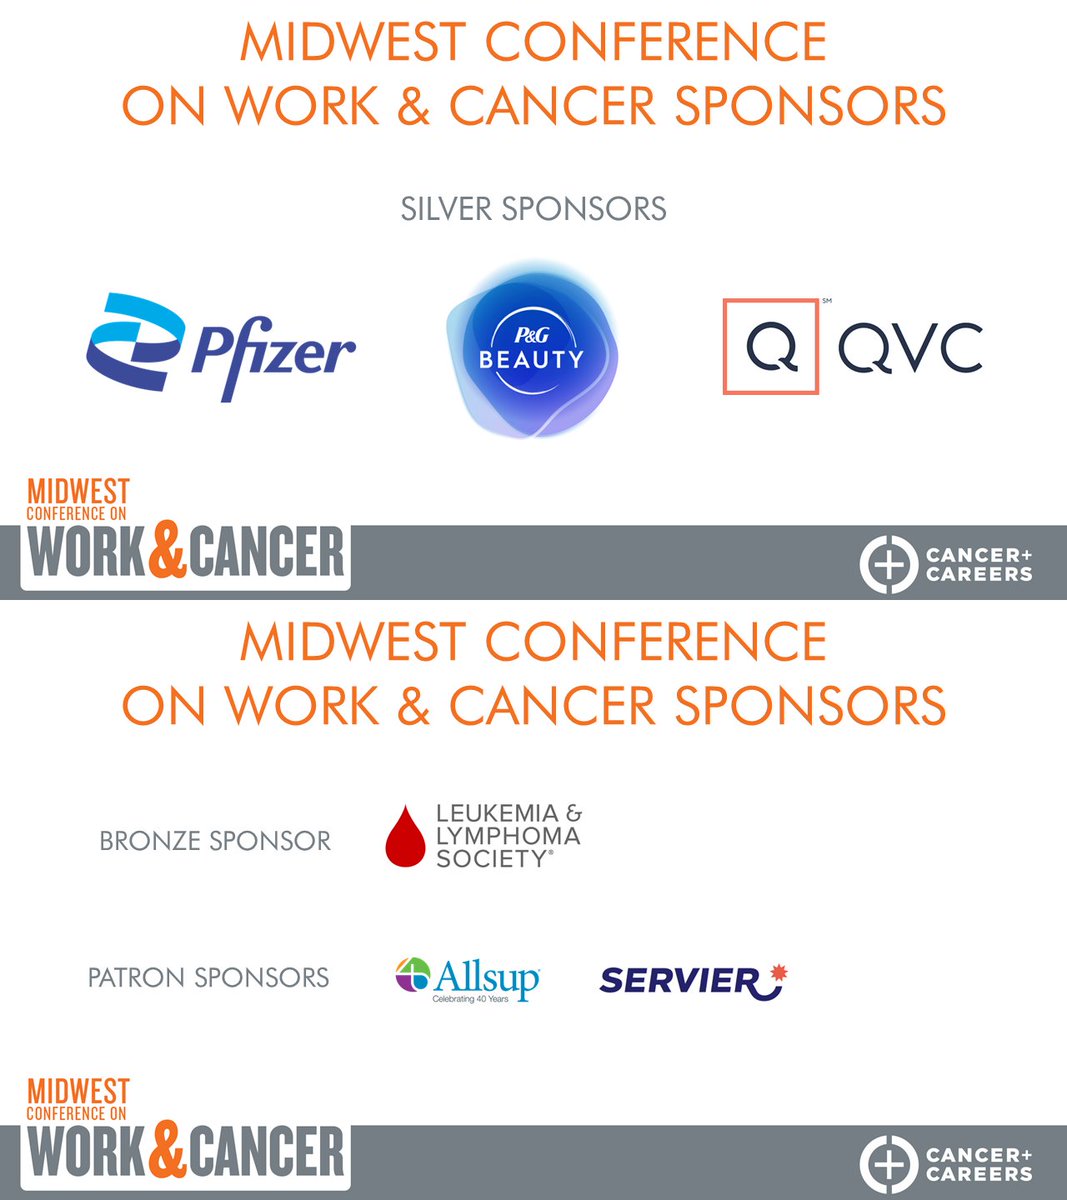 ...and thanks to @PfizerOncMed @PGBeauty @QVC @LLSusa @allsup @Servier

#CACMidwest